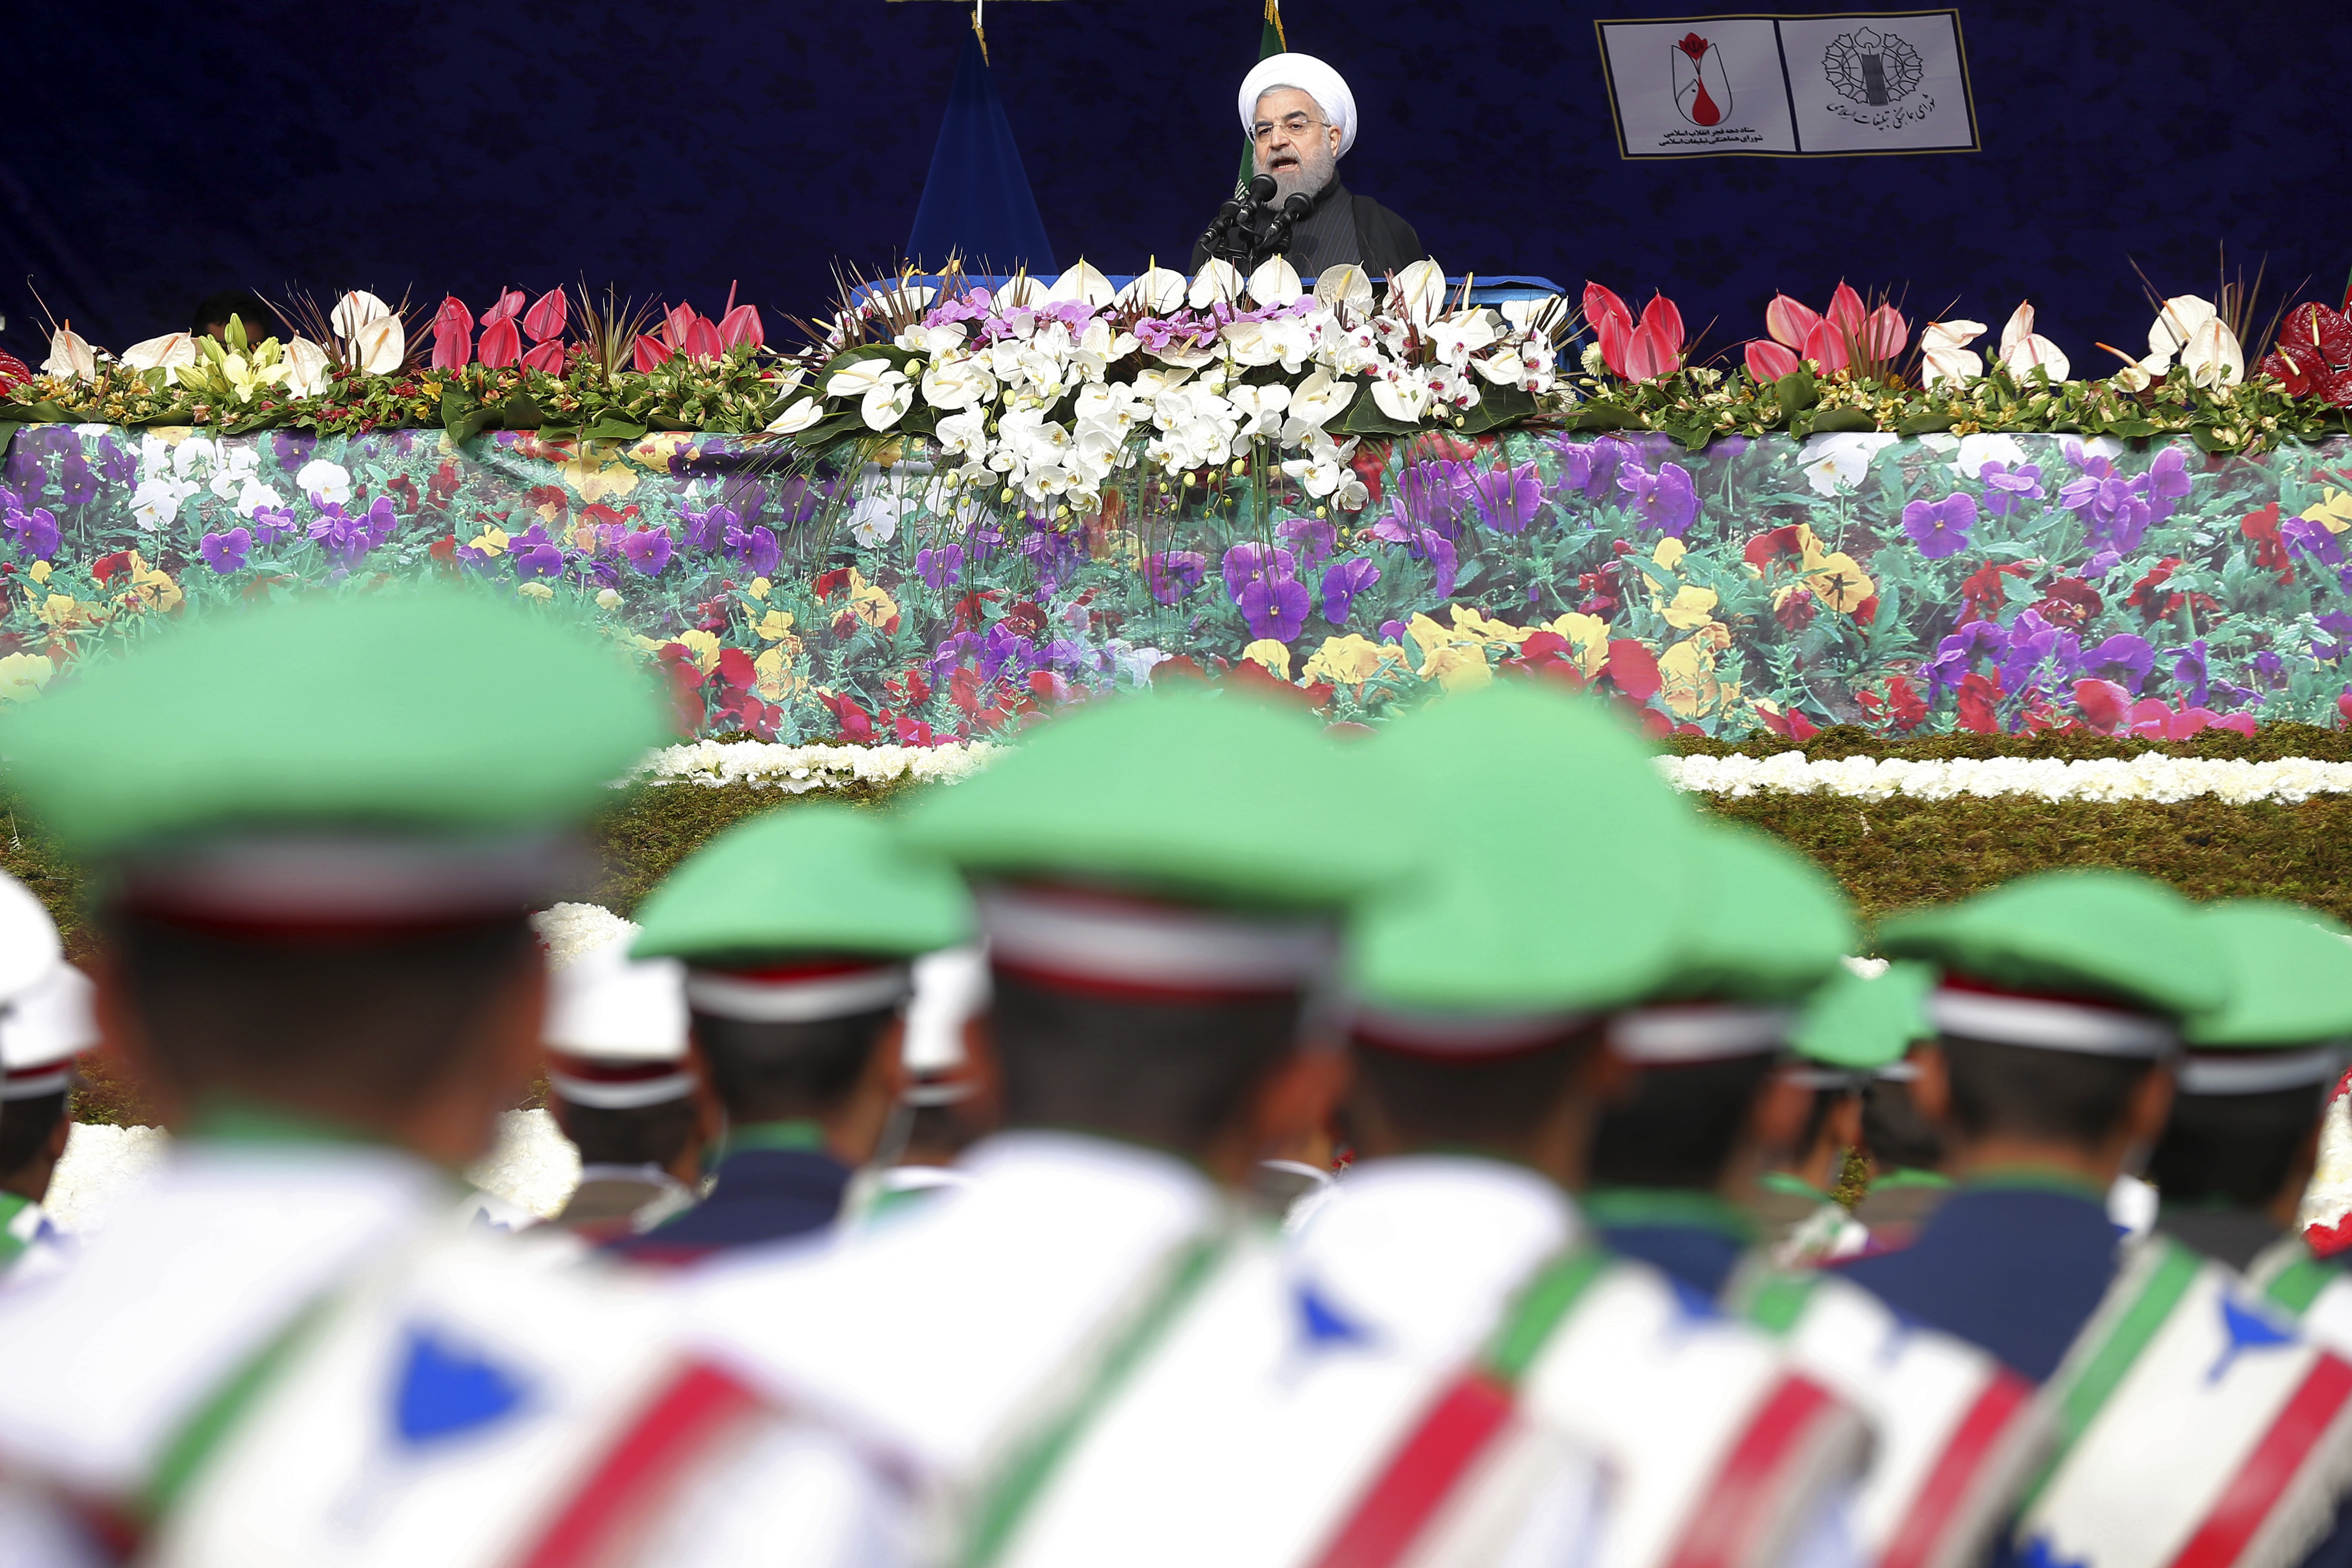 Iranian President Hassan Rouhani delivers a speech during an annual rally commemorating the anniversary of the 1979 Islamic revolution, which toppled the late pro-U.S. Shah, Mohammad Reza Pahlavi, in Tehran, Iran, Friday, Feb. 10, 2017. (AP Photo/Ebrahim Noroozi)